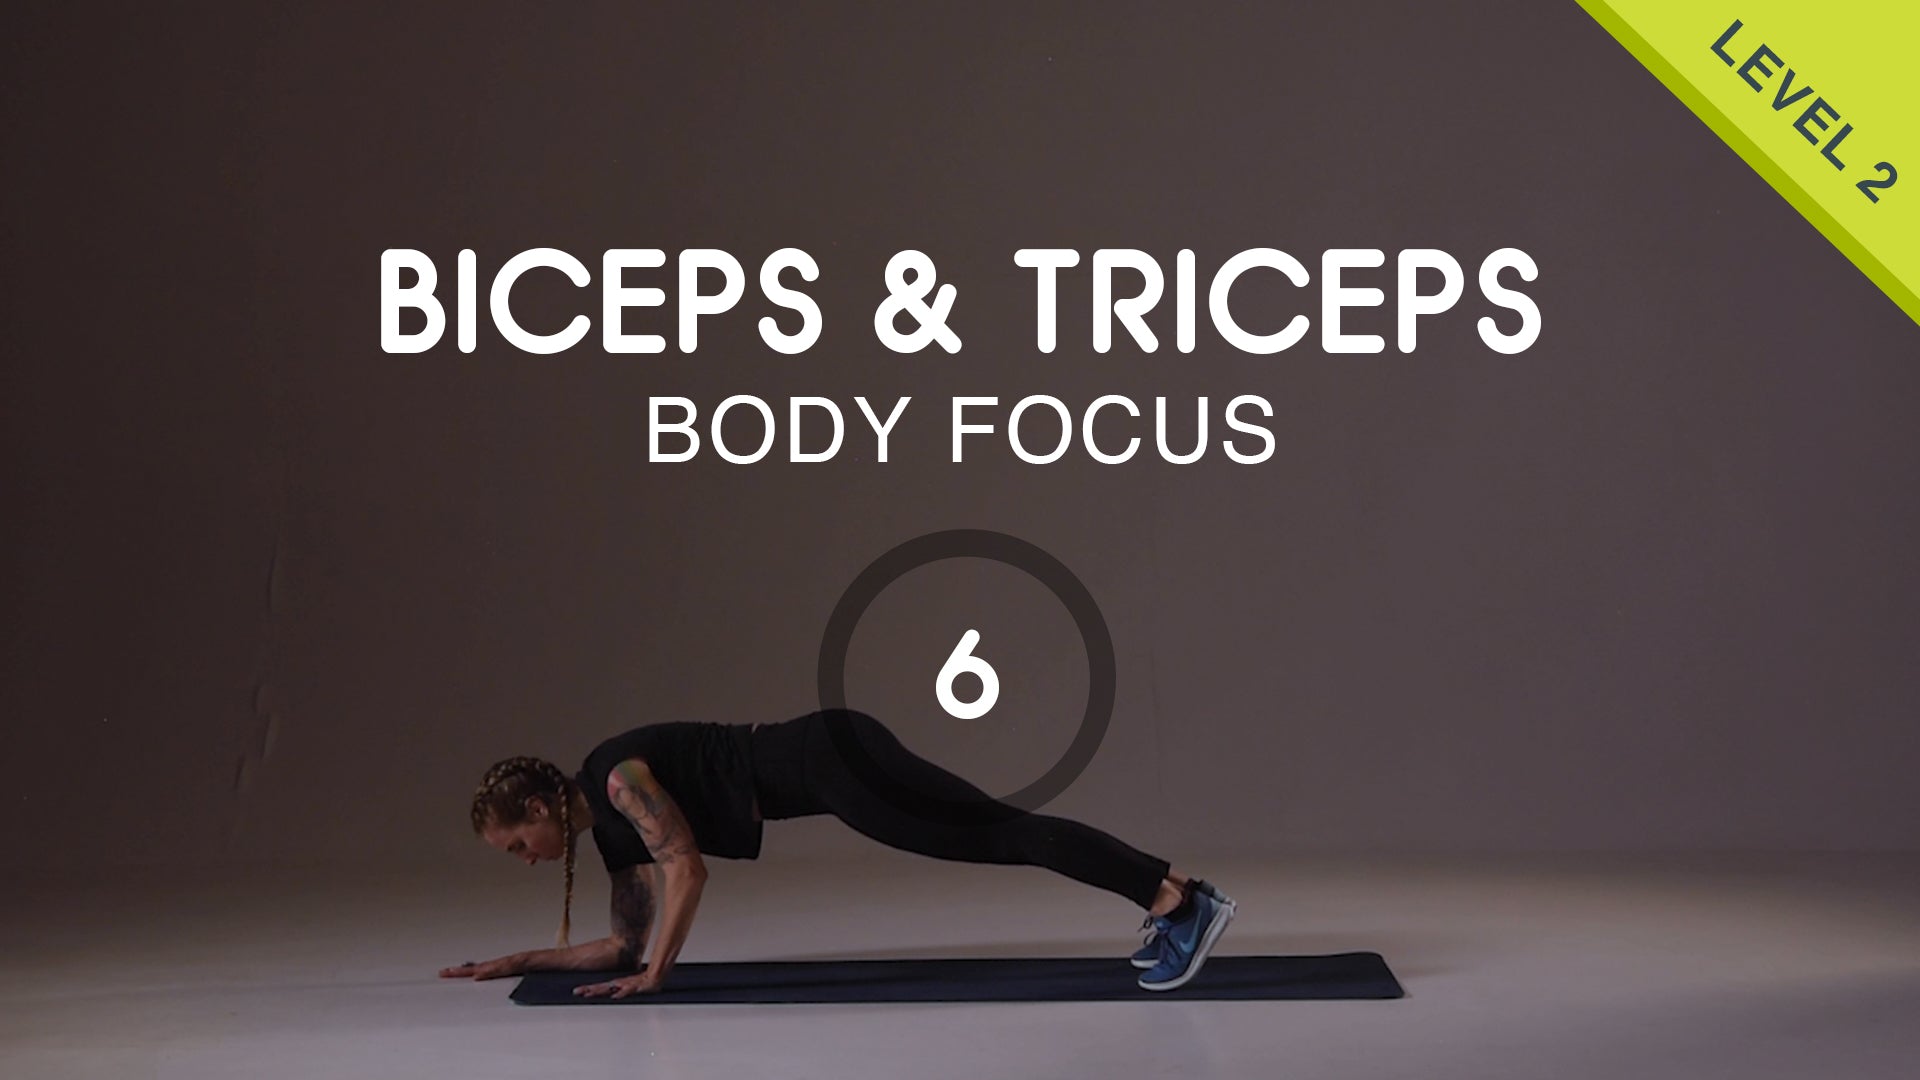 10 min HIIT Workout for Triceps, Core and Shoulders - Level 2 – Group HIIT